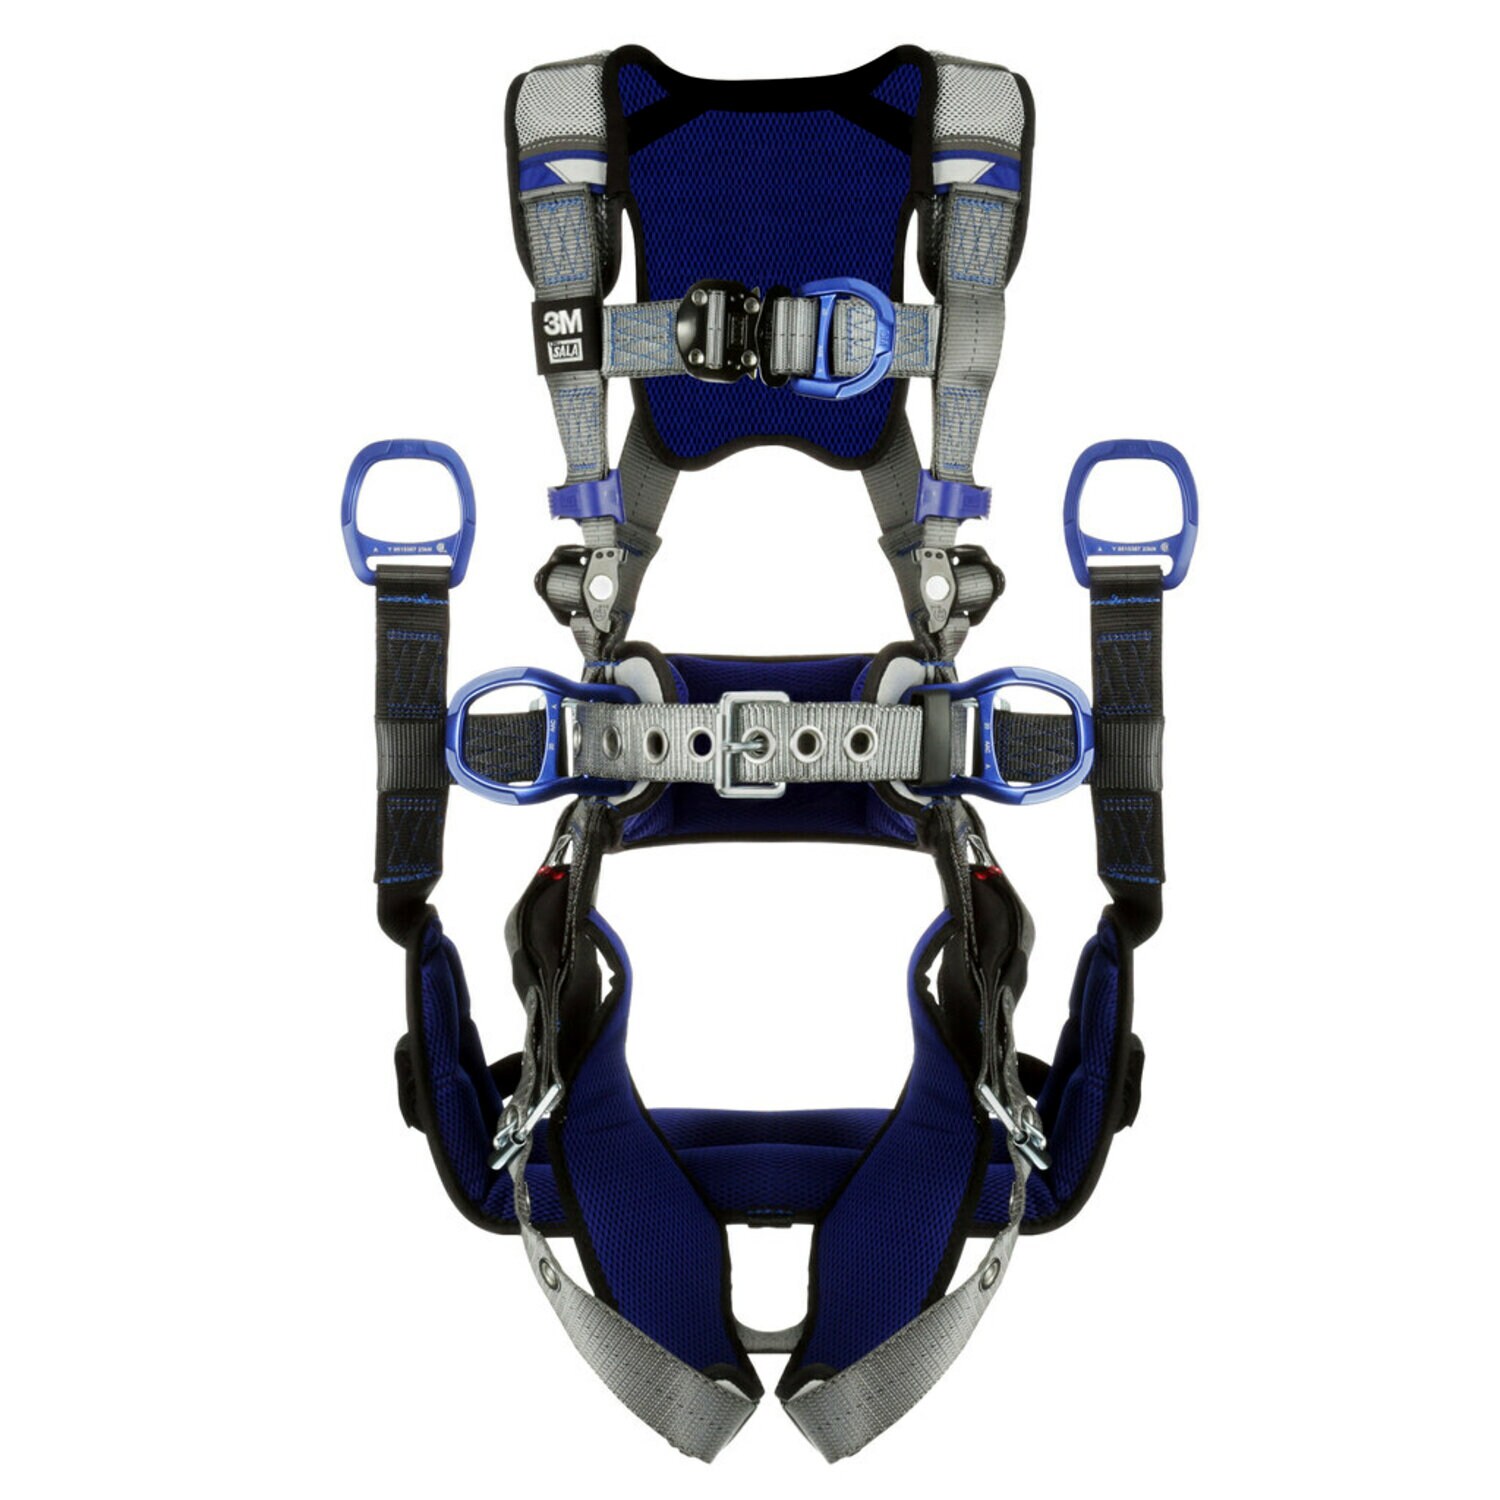 7012817887 - 3M DBI-SALA ExoFit X200 Comfort Tower Climbing/Positioning/Suspension Safety Harness 1402140, Small